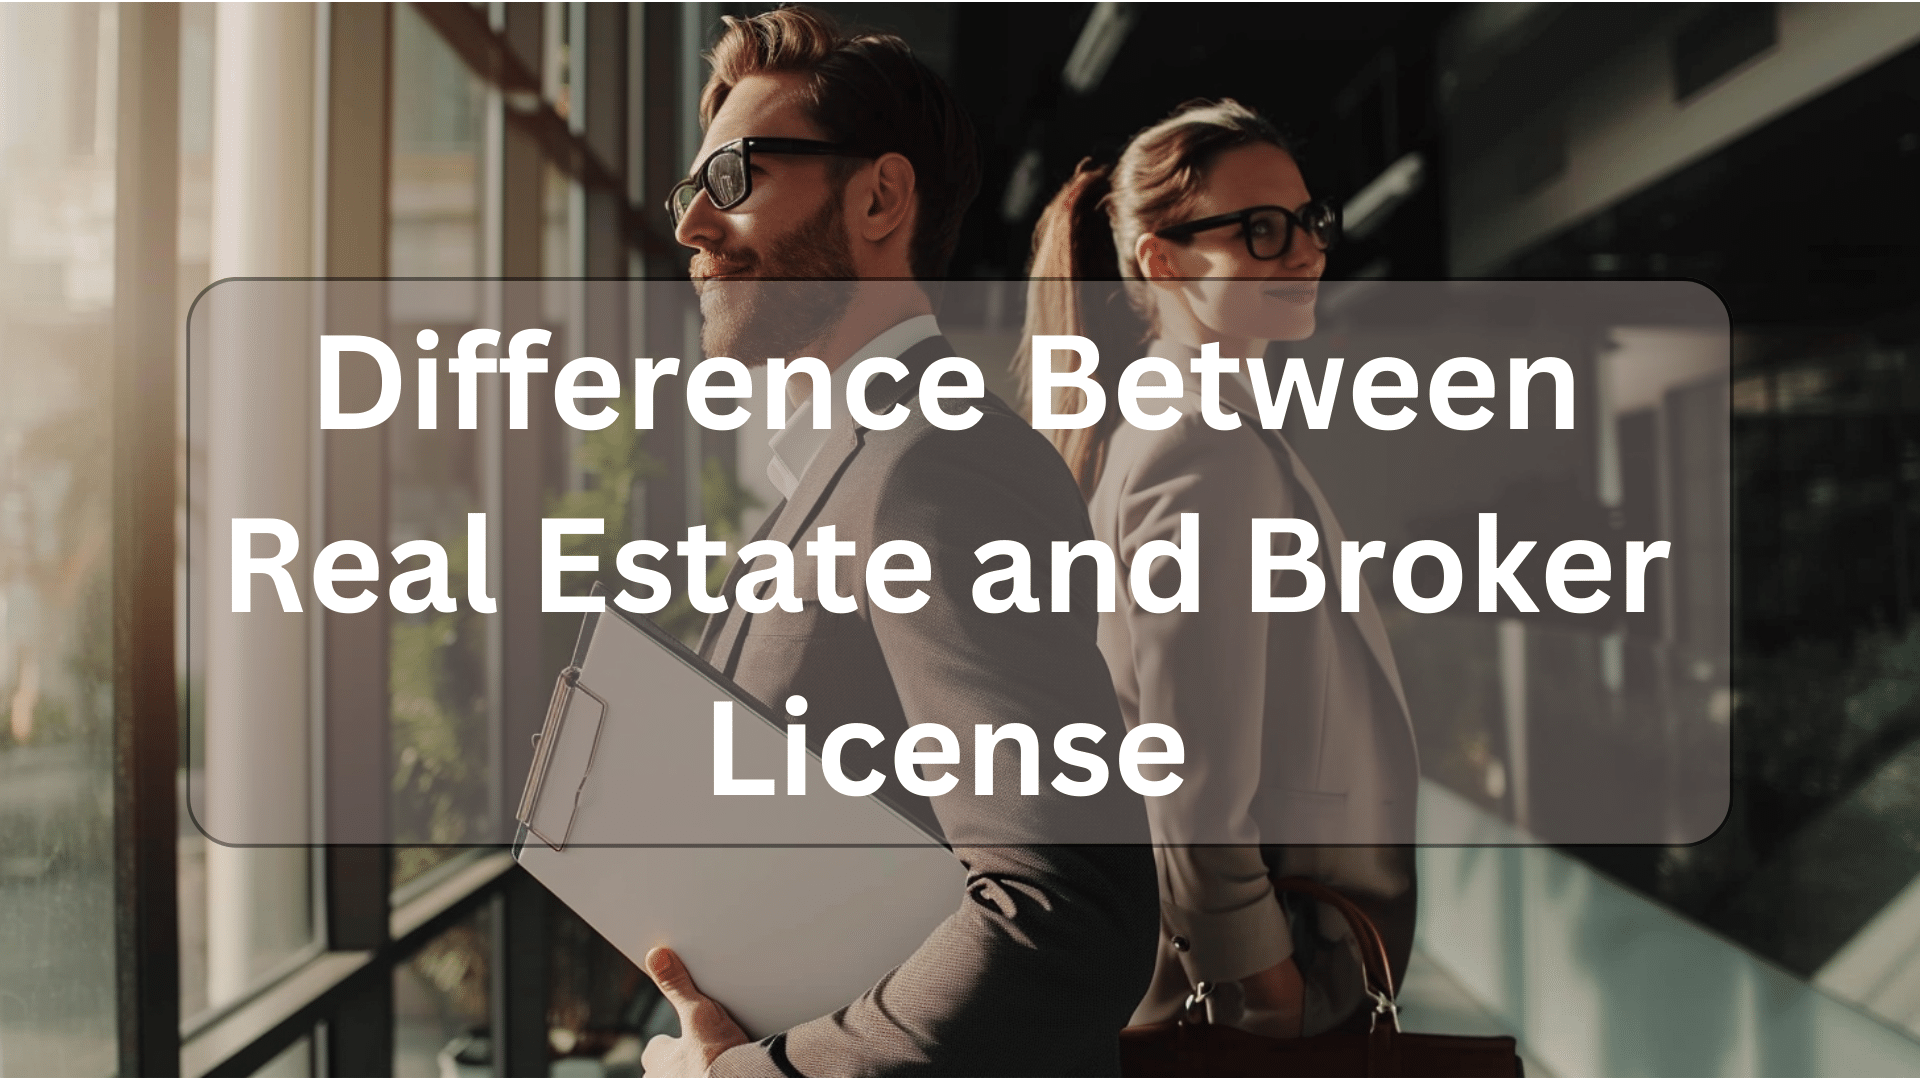 Difference between real estate and broker license illustration